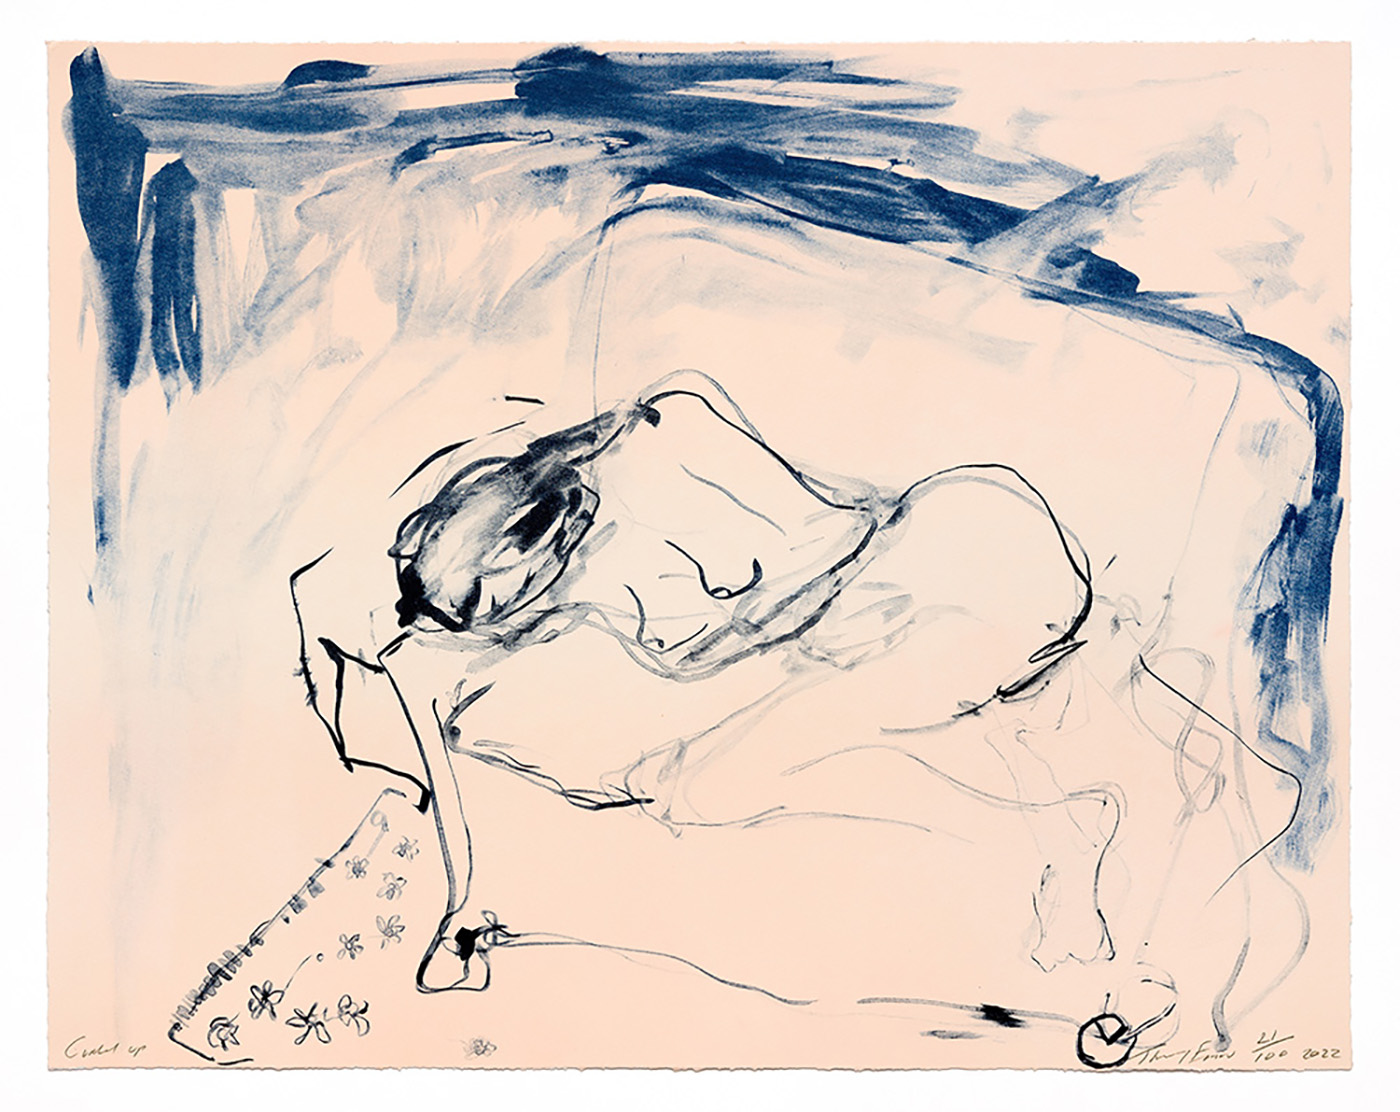 Tracey Emin, Curled Up (2022), Lithograph, Edition of 100